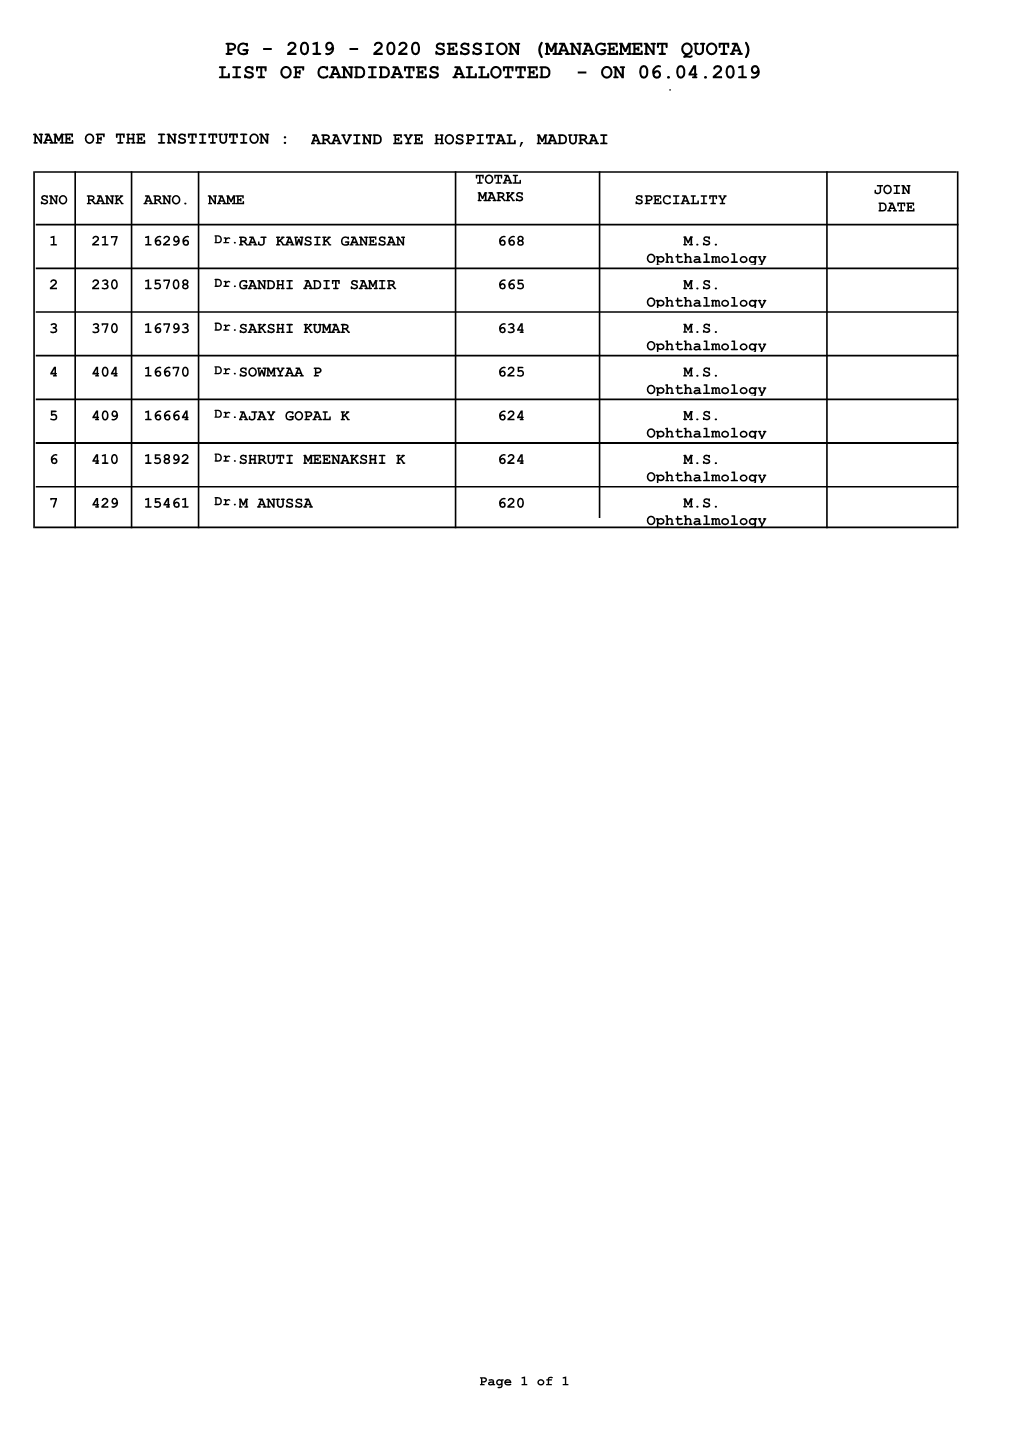 Management Quota) List of Candidates Allotted - on 06.04.2019